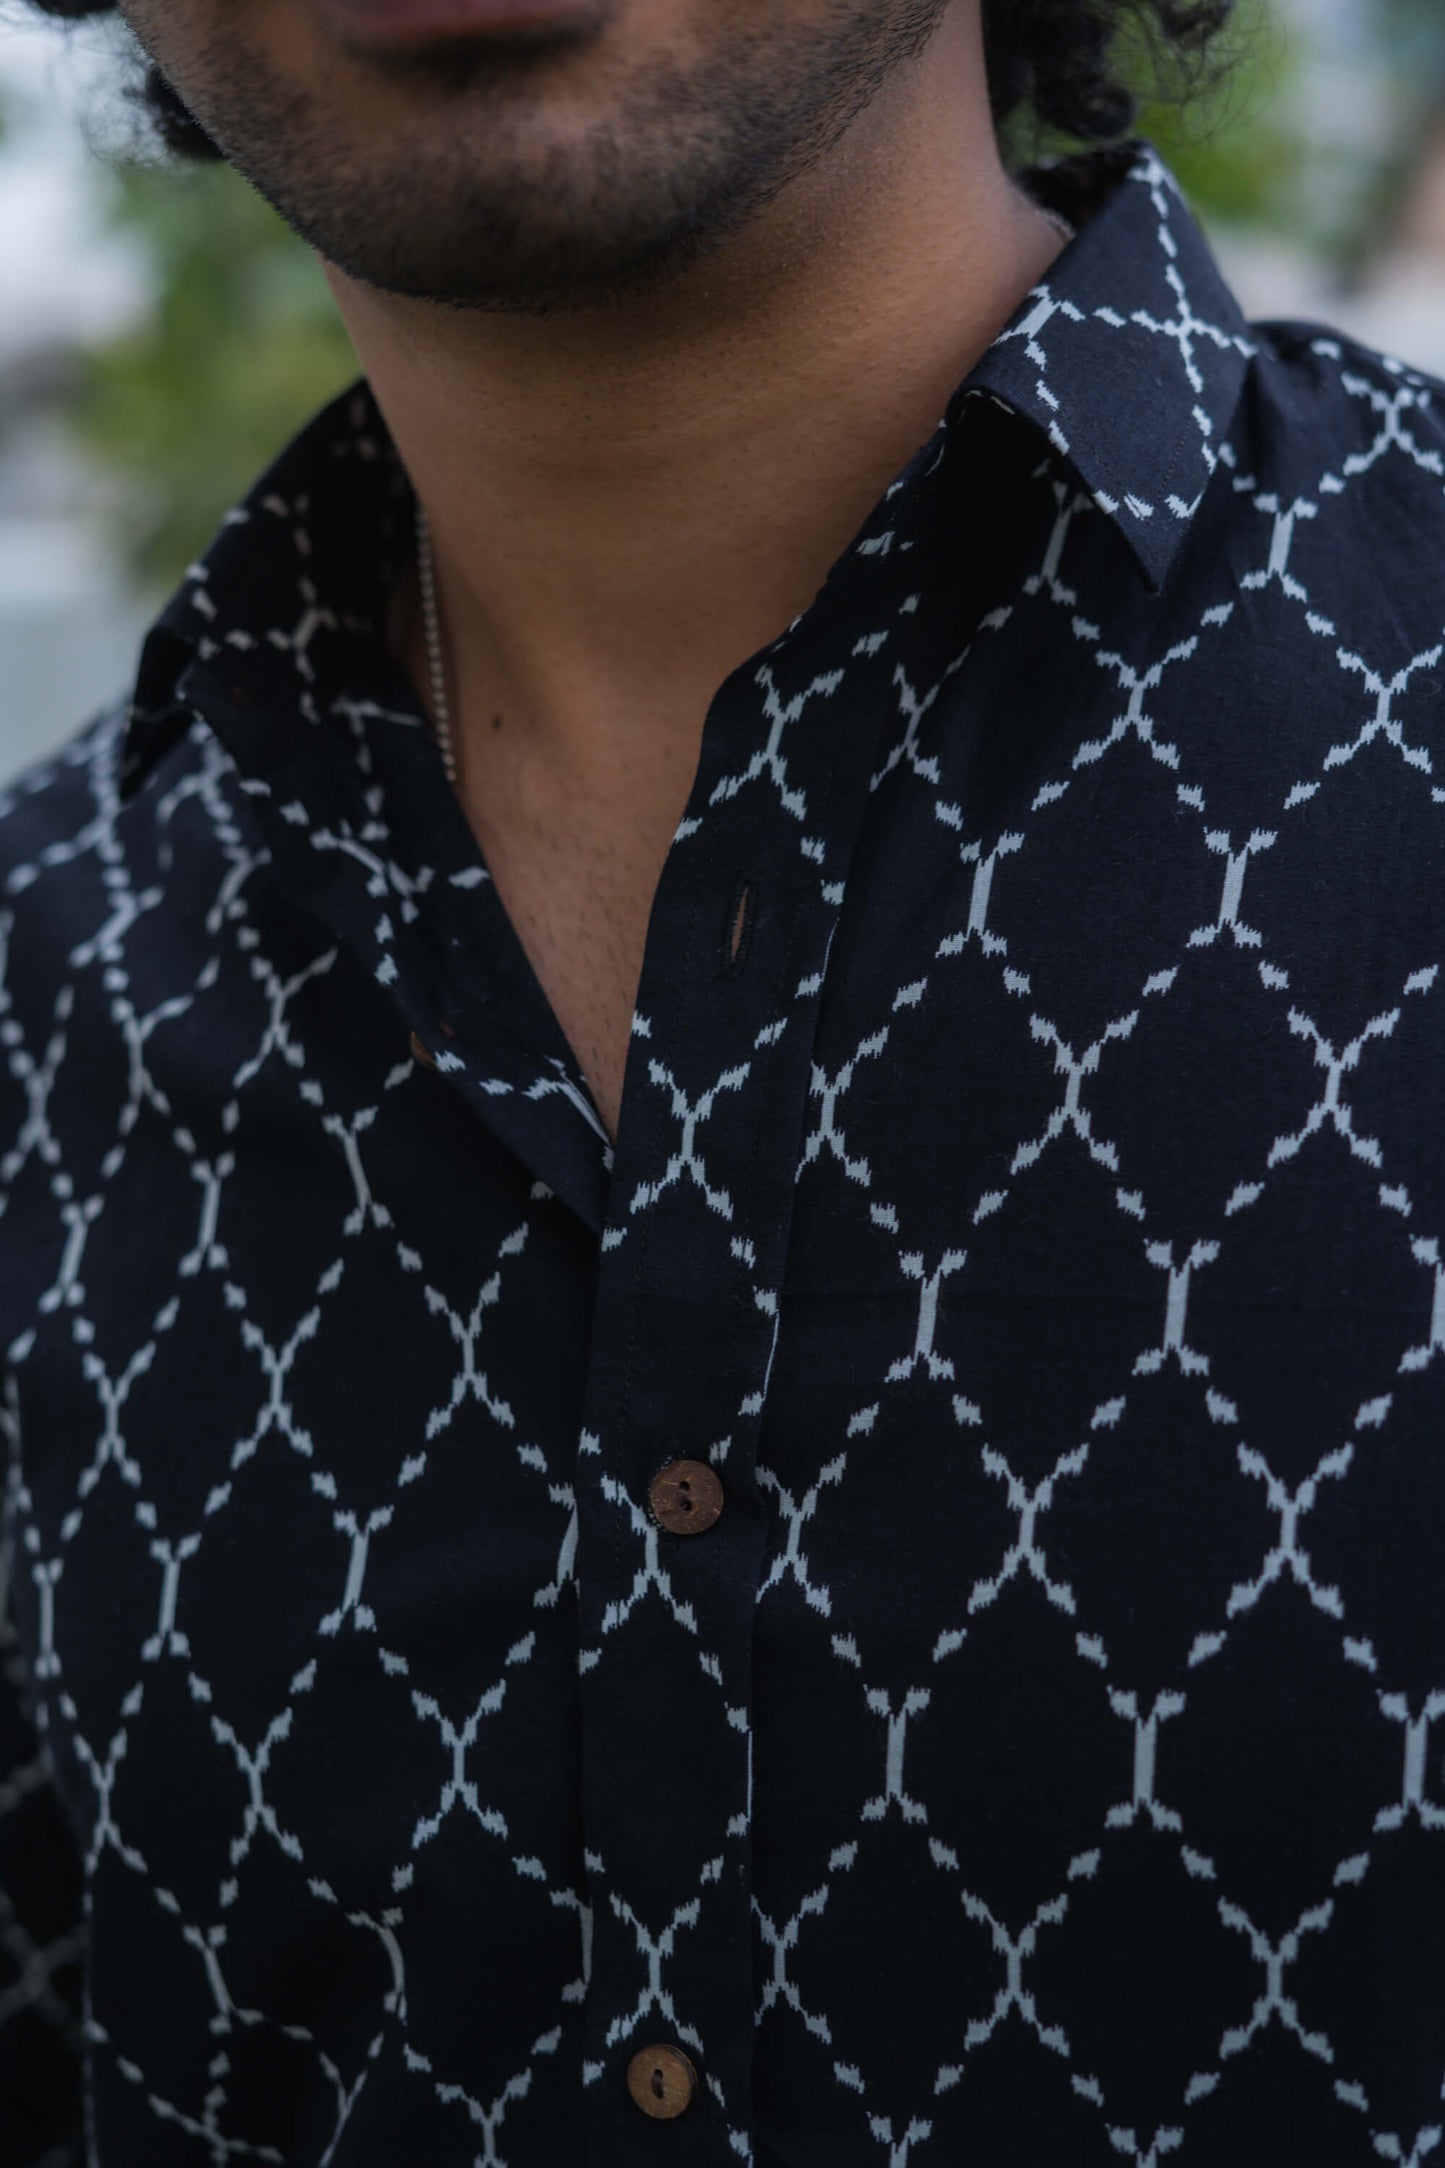 The Black Shirt With White Chains Look Print.